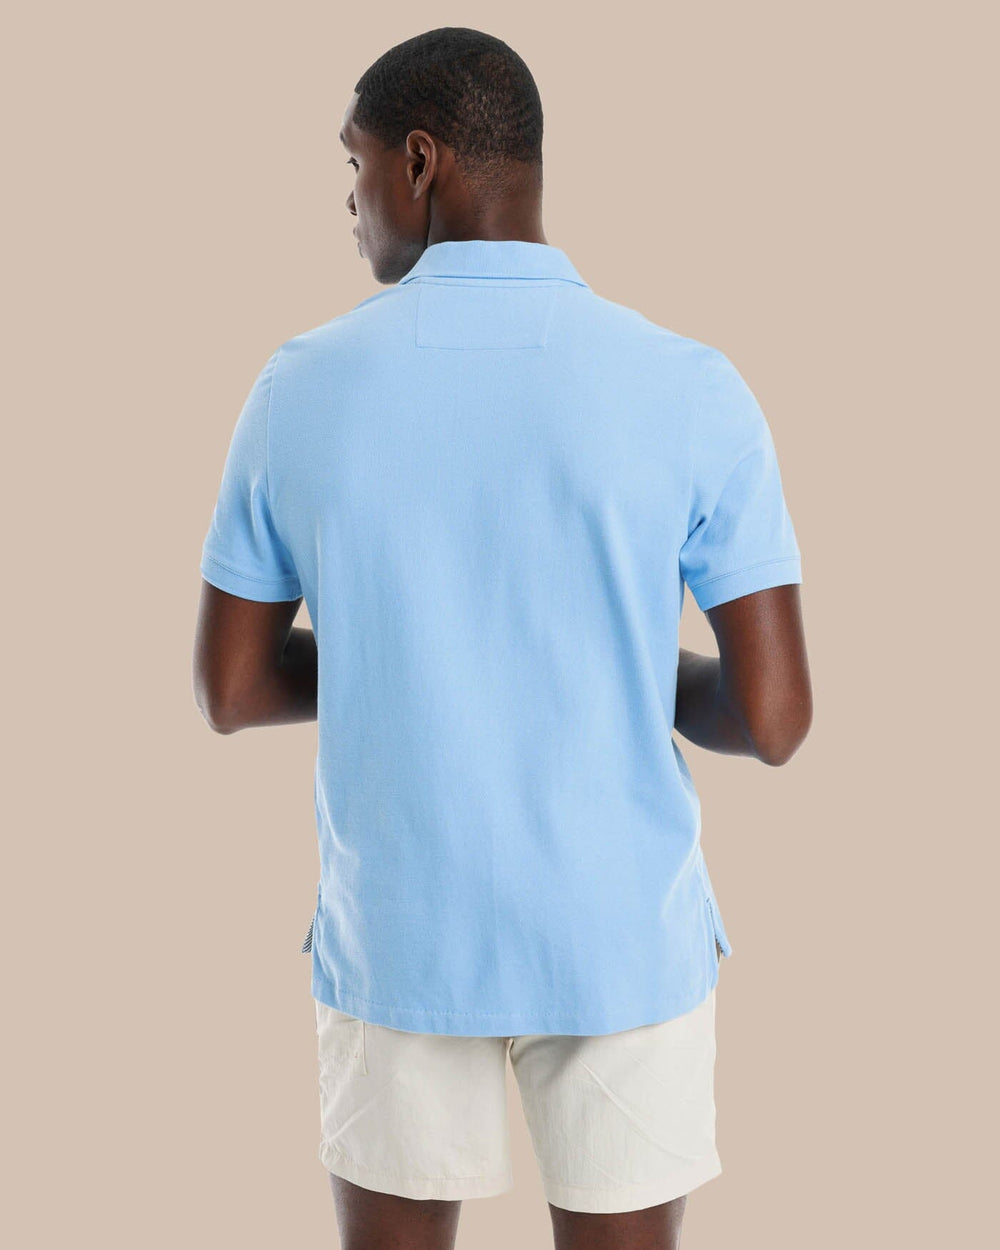 The model back view of the Men's New Skipjack Polo Shirt by Southern Tide - Ocean Channel